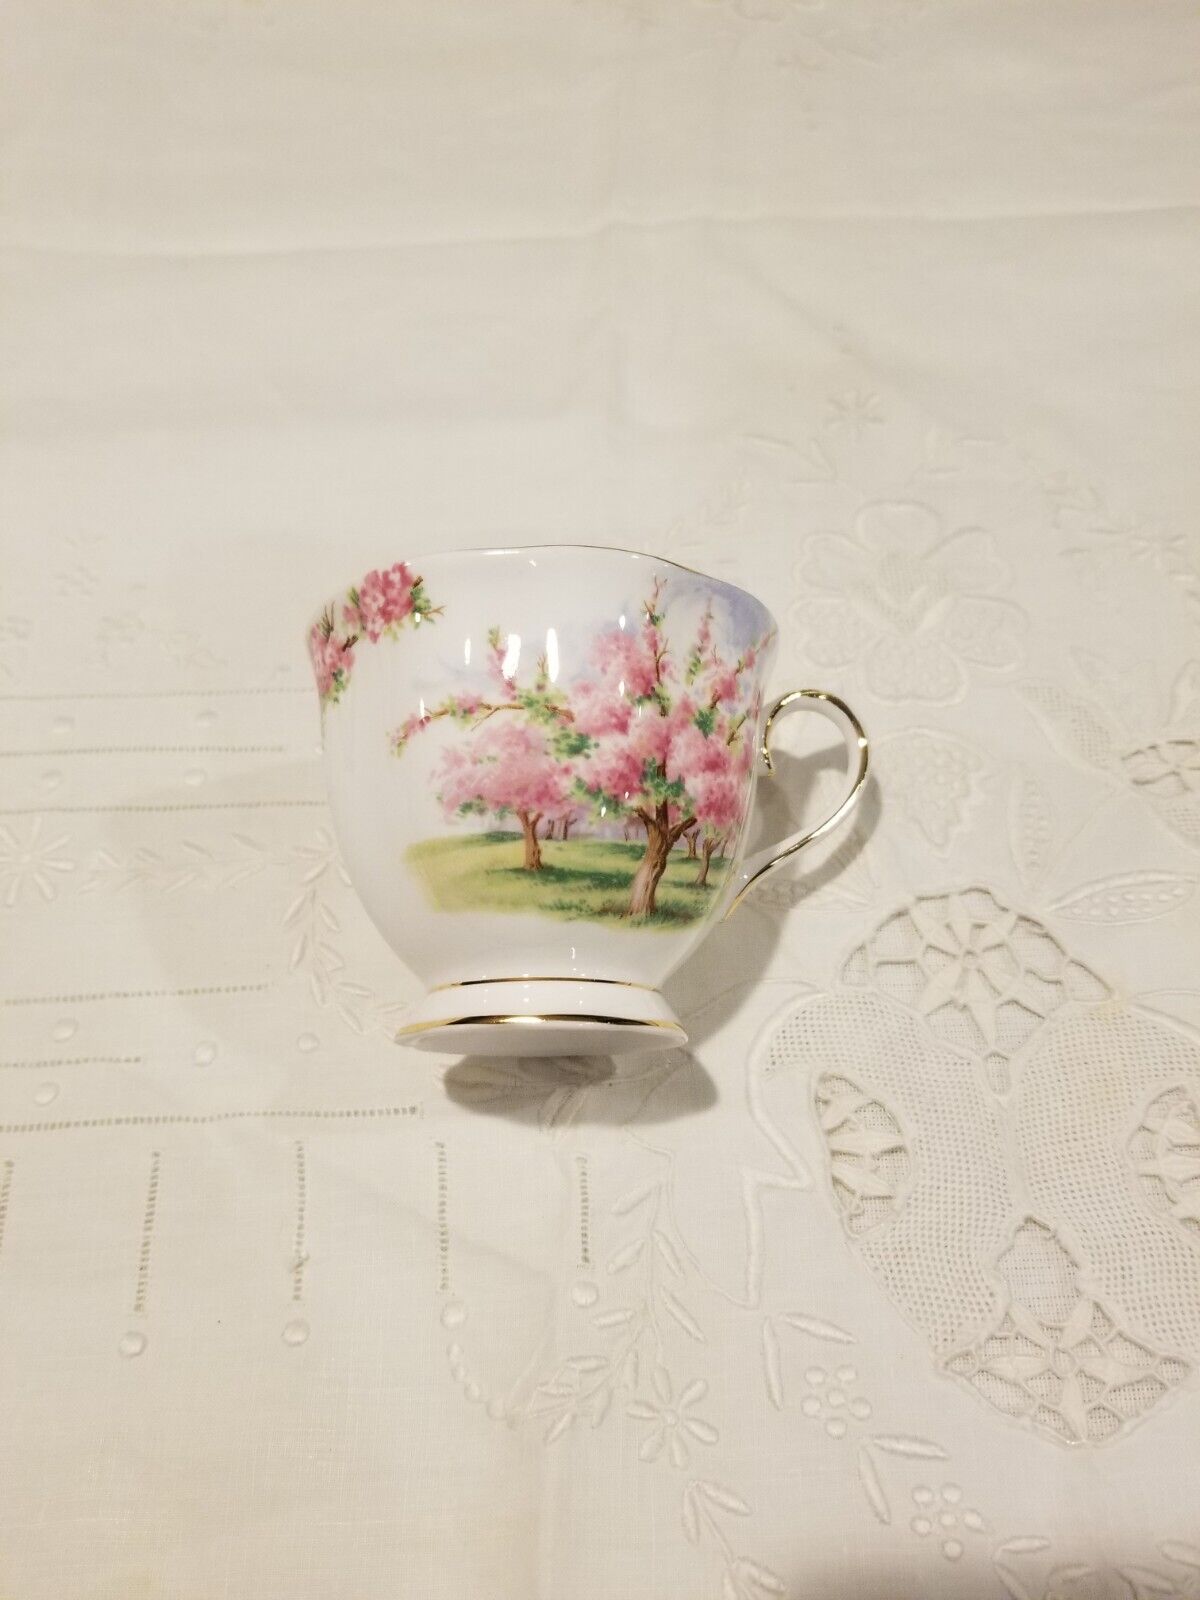 Set of Royal Albert Teacup Trio Blossom Time Set of 5 Pieces Dinner 